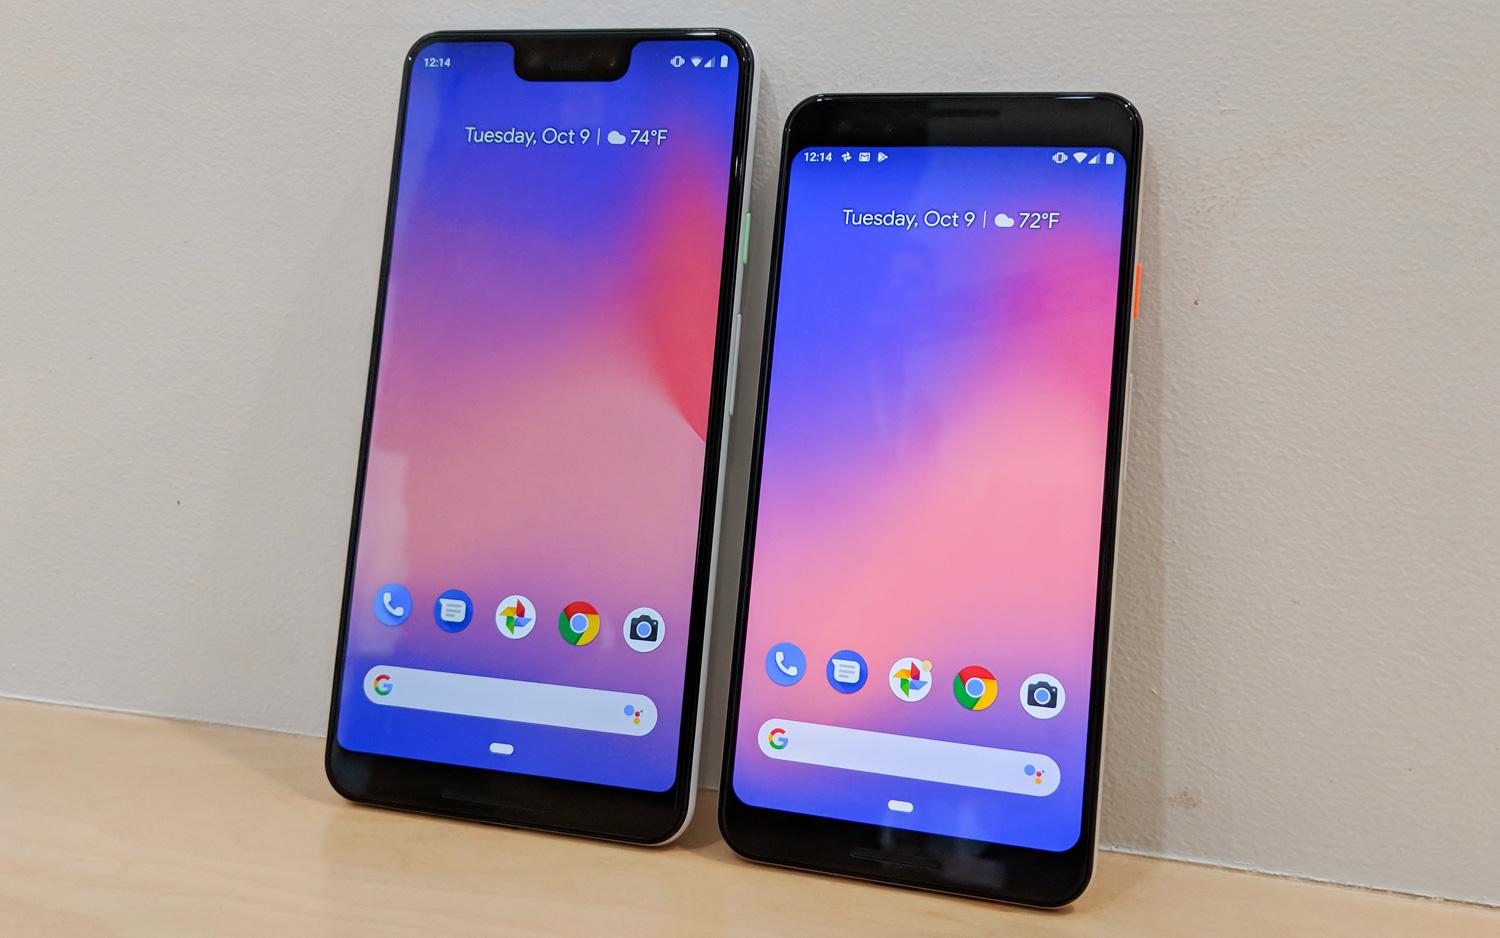 The Best Google Pixel 3 and Pixel 3 XL Deals Right Now